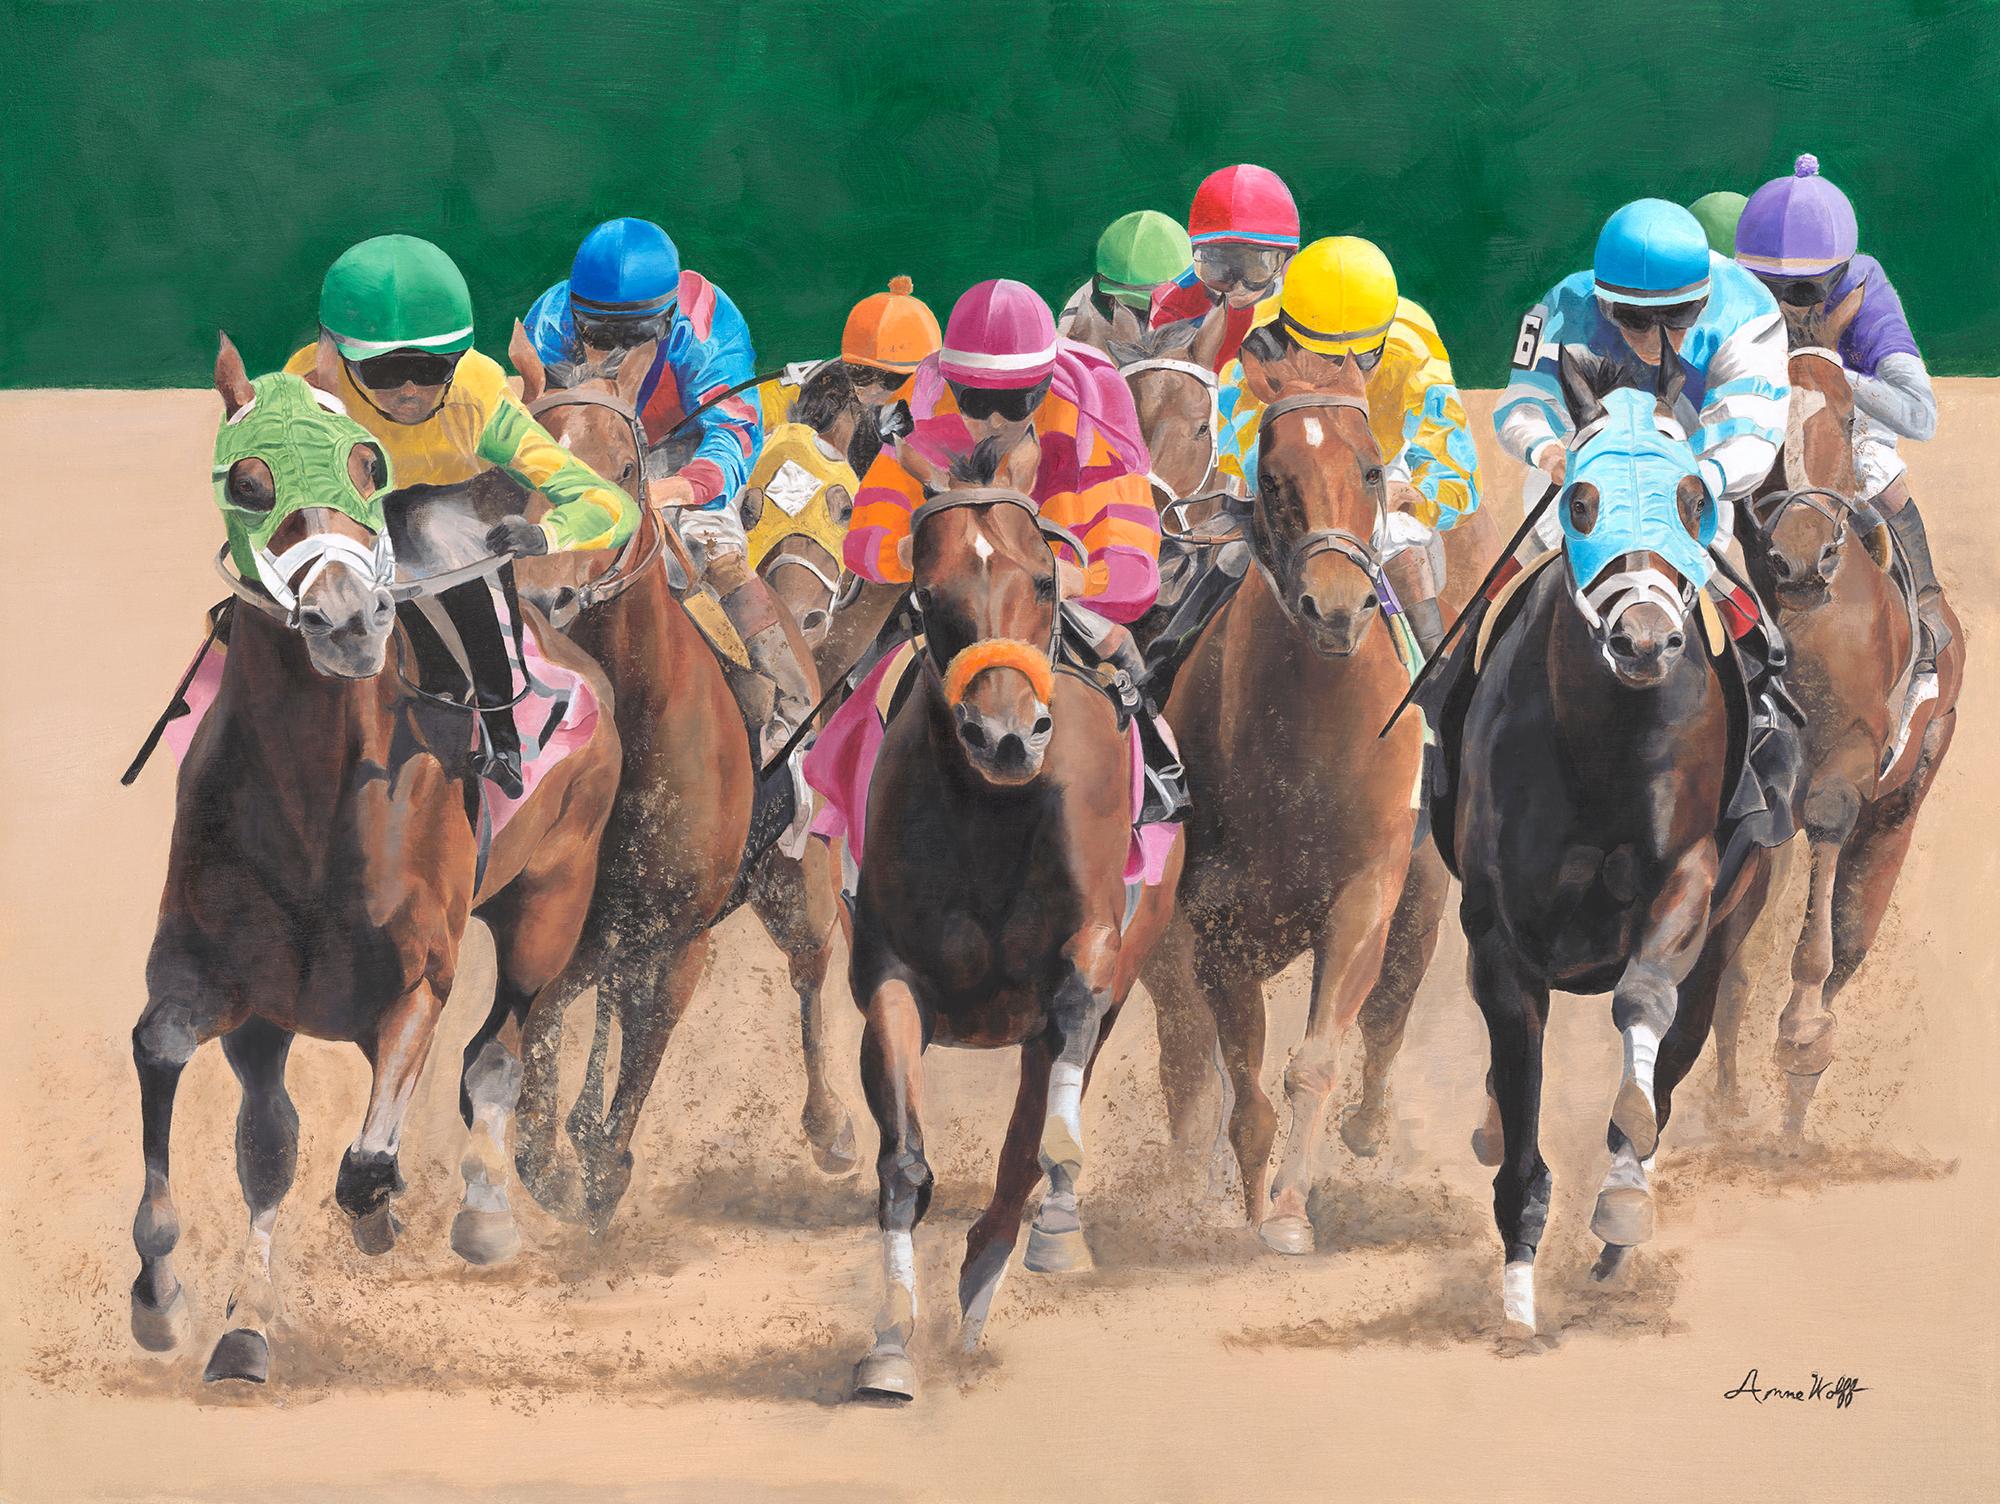 Anne Wolff, "Turning for Home", Colorful Equine Horse Racing Oil Painting 